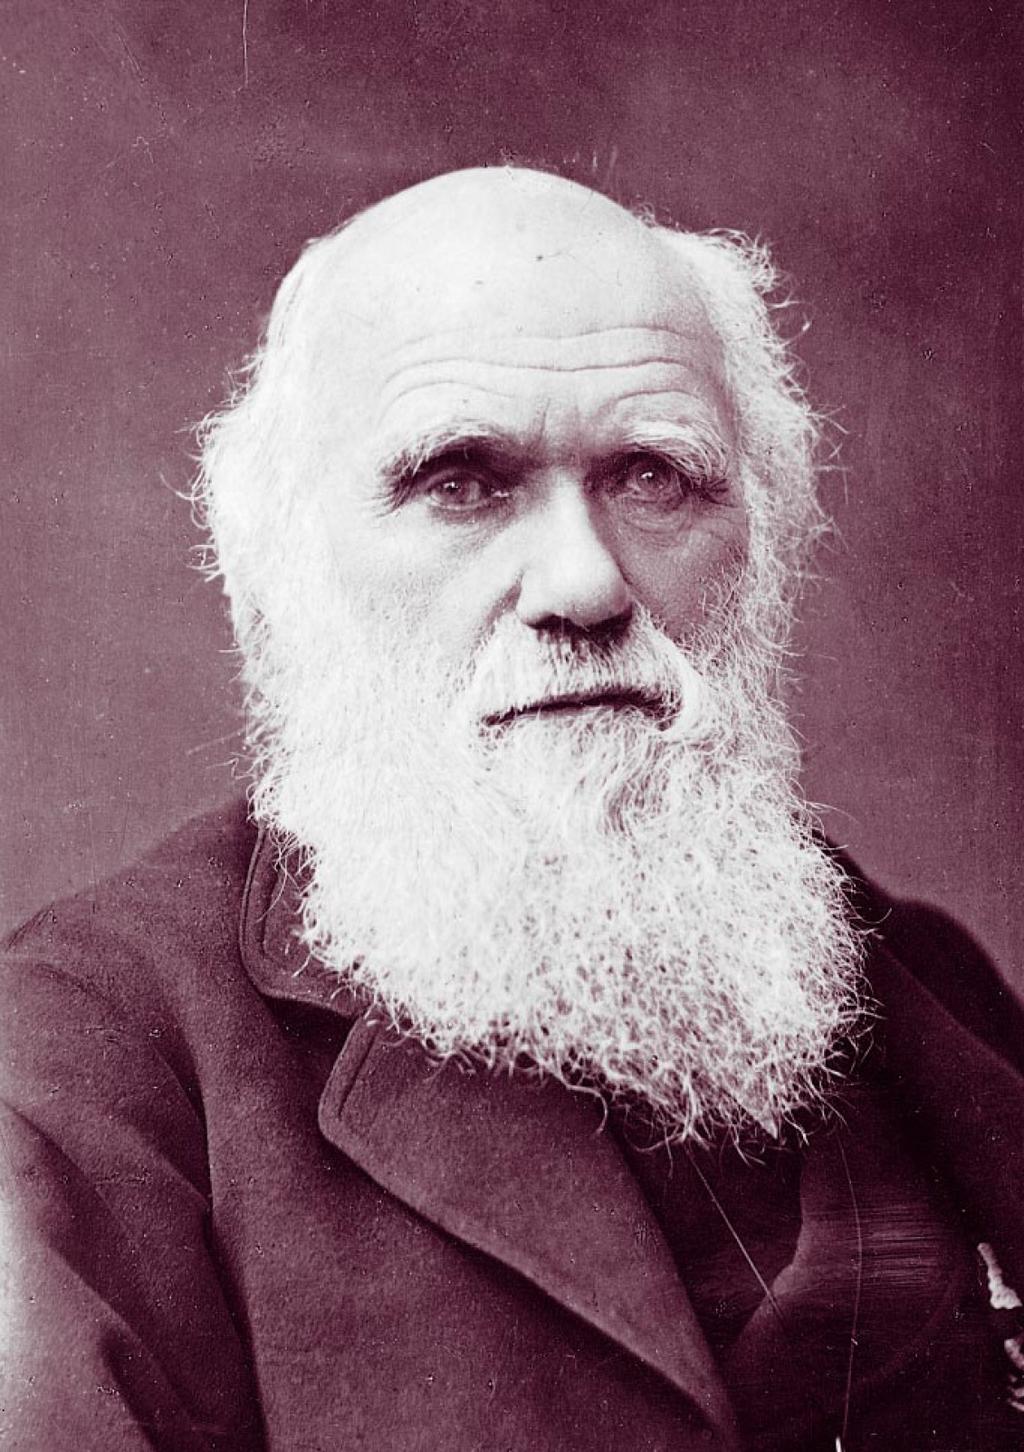 Once described as "the single best idea anyone has ever had," English naturalist Charles Darwin's "Theory of Evolution" proposes that all life, including humans, is related and is descended from a